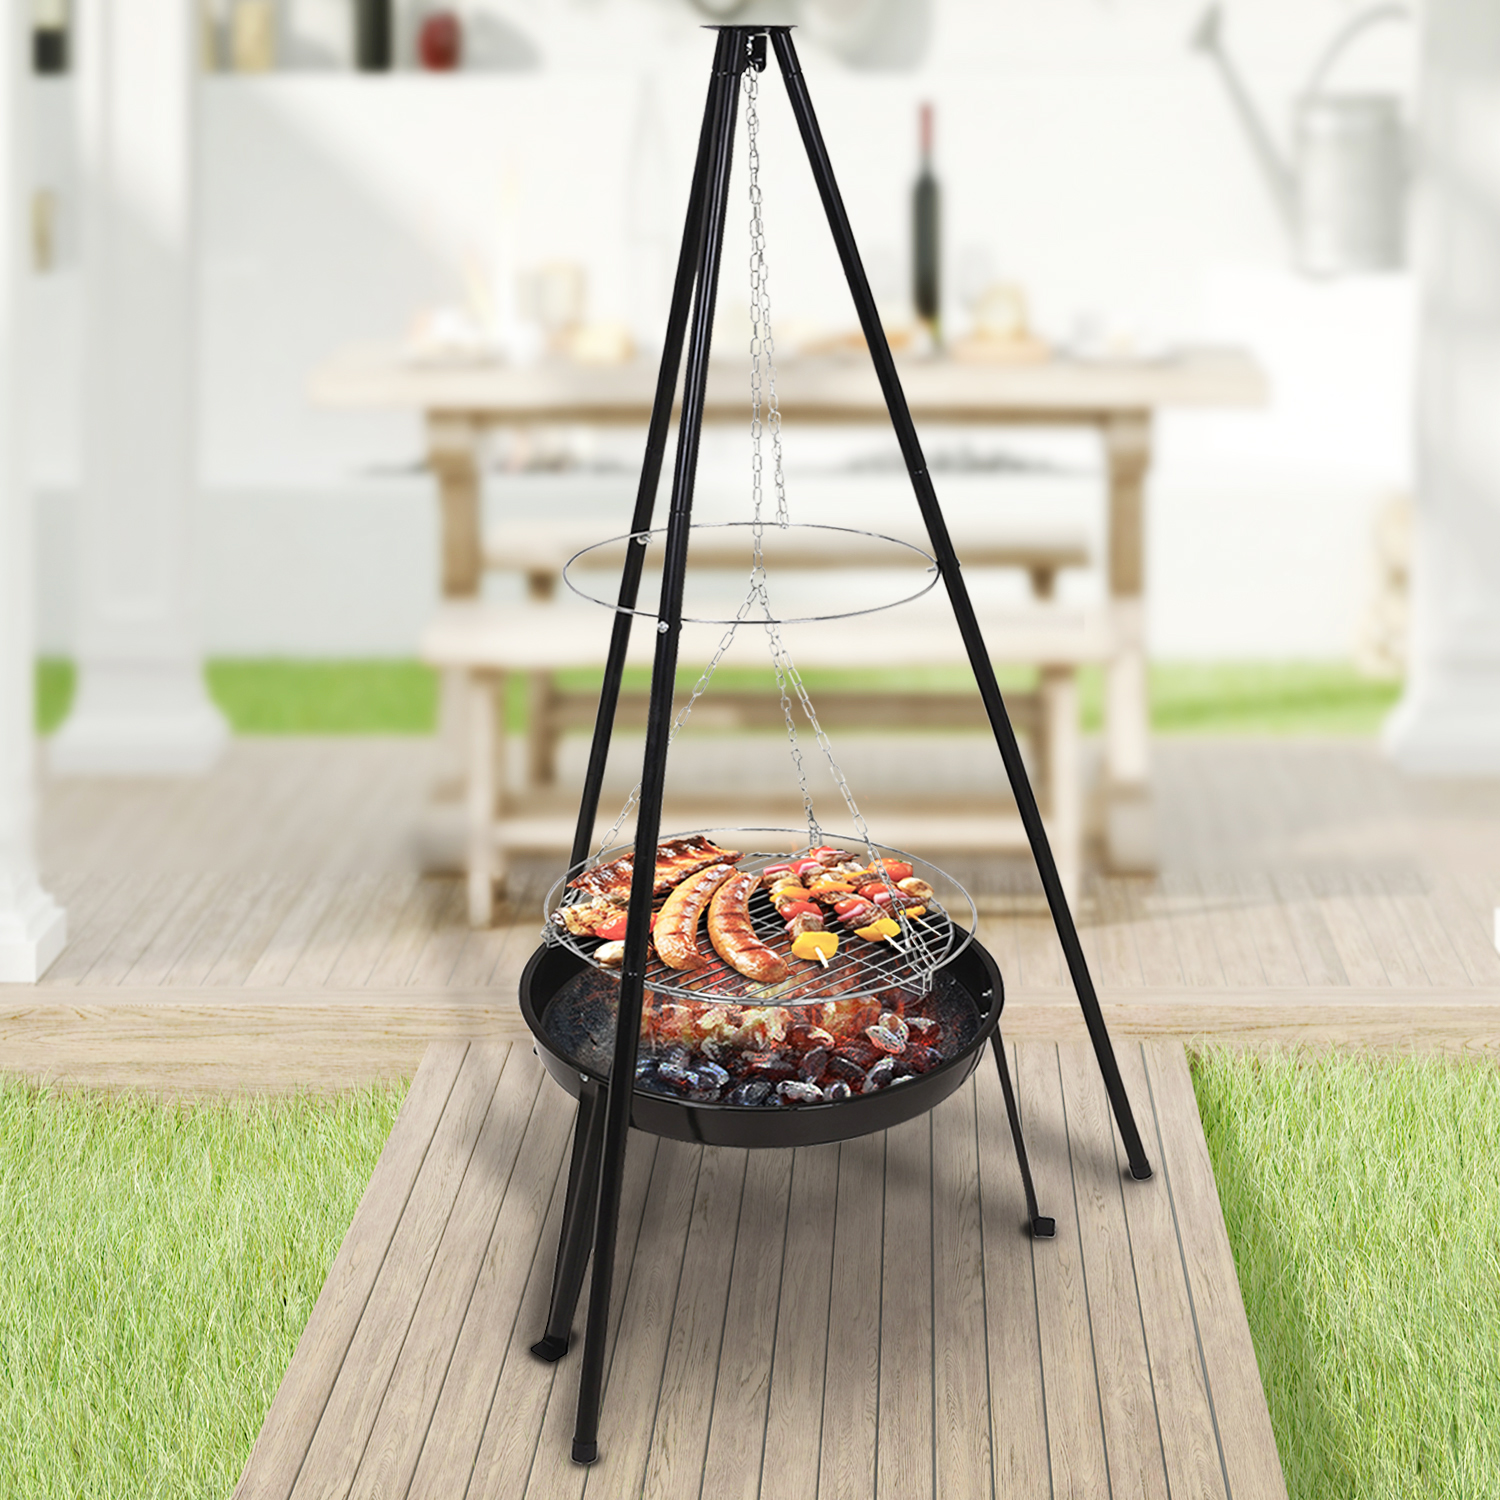 BBQ Firepit Hanging Grill Campfire Outdoor Fire Camping Cooking Patio ...